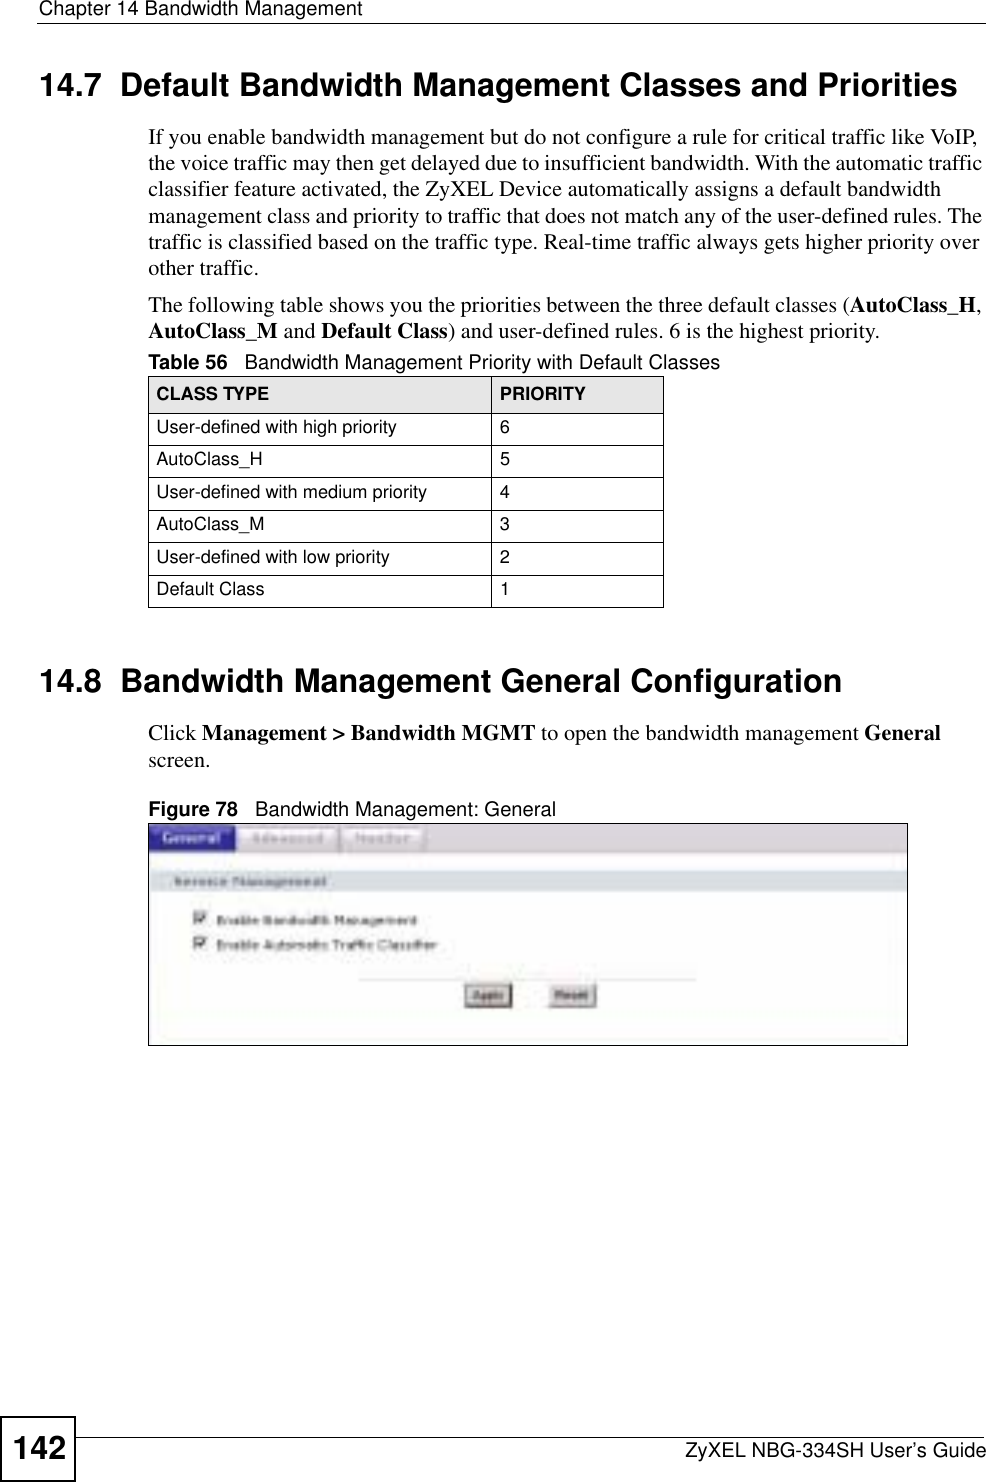 Chapter 14 Bandwidth ManagementZyXEL NBG-334SH User’s Guide14214.7  Default Bandwidth Management Classes and PrioritiesIf you enable bandwidth management but do not configure a rule for critical traffic like VoIP, the voice traffic may then get delayed due to insufficient bandwidth. With the automatic traffic classifier feature activated, the ZyXEL Device automatically assigns a default bandwidth management class and priority to traffic that does not match any of the user-defined rules. The traffic is classified based on the traffic type. Real-time traffic always gets higher priority over other traffic. The following table shows you the priorities between the three default classes (AutoClass_H,AutoClass_M and Default Class) and user-defined rules. 6 is the highest priority.14.8  Bandwidth Management General Configuration Click Management &gt; Bandwidth MGMT to open the bandwidth management Generalscreen.Figure 78   Bandwidth Management: GeneralTable 56   Bandwidth Management Priority with Default ClassesCLASS TYPE PRIORITYUser-defined with high priority 6AutoClass_H 5User-defined with medium priority 4AutoClass_M 3User-defined with low priority 2Default Class 1